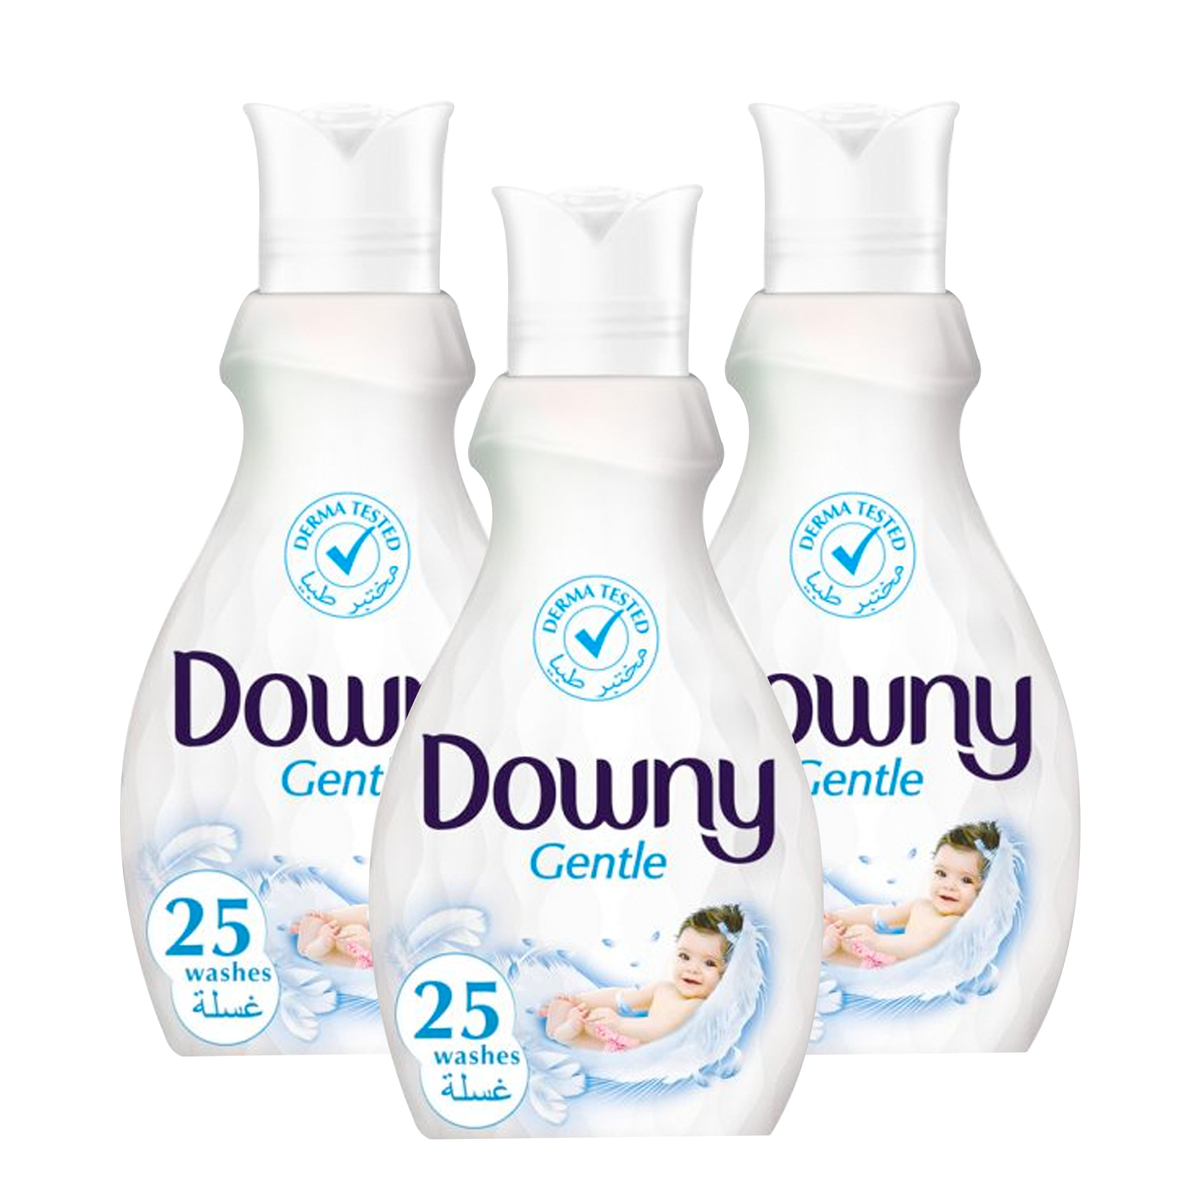 Downy Concentrate Gentle Fabric Softener Value Pack 3 x 1 Litre